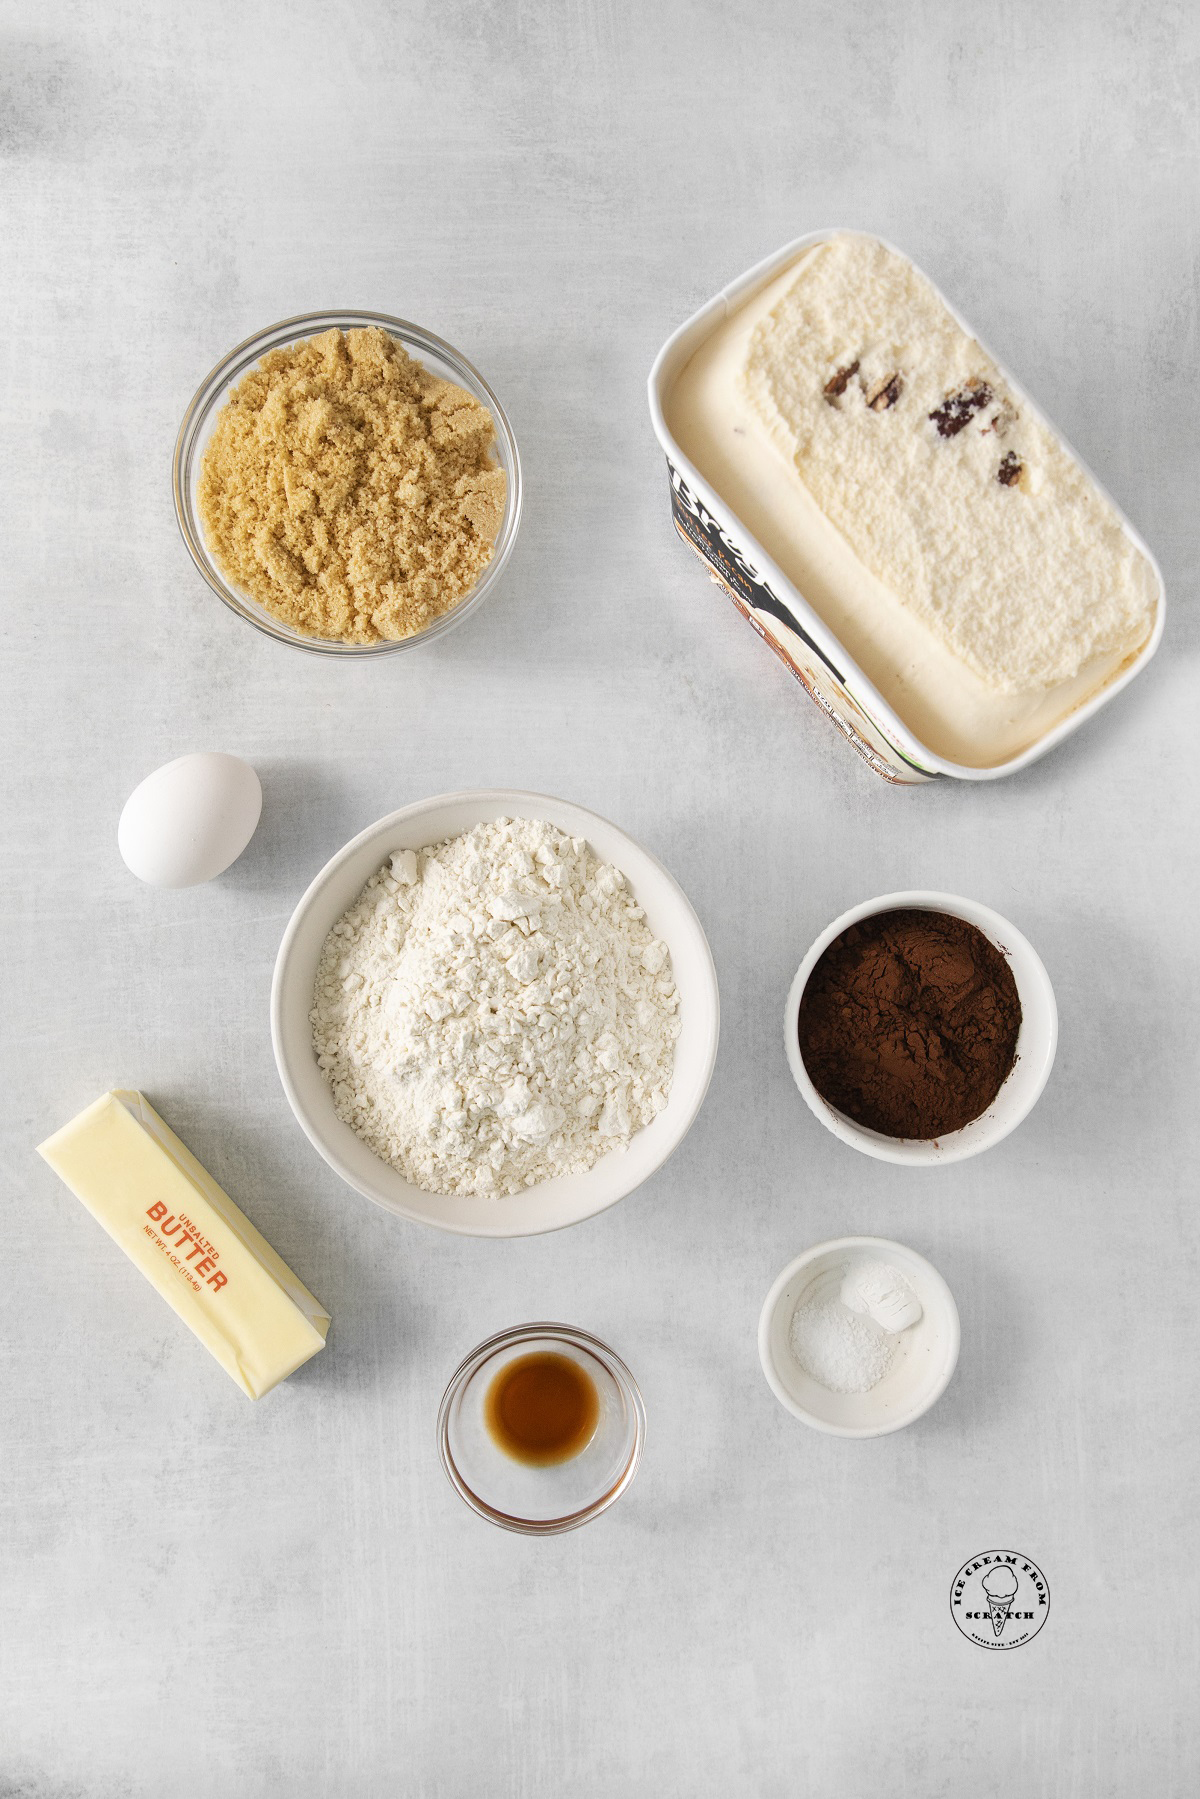 A tub of butter pecan ice cream, plus the ingredients needed to make ice cream sandwiches.